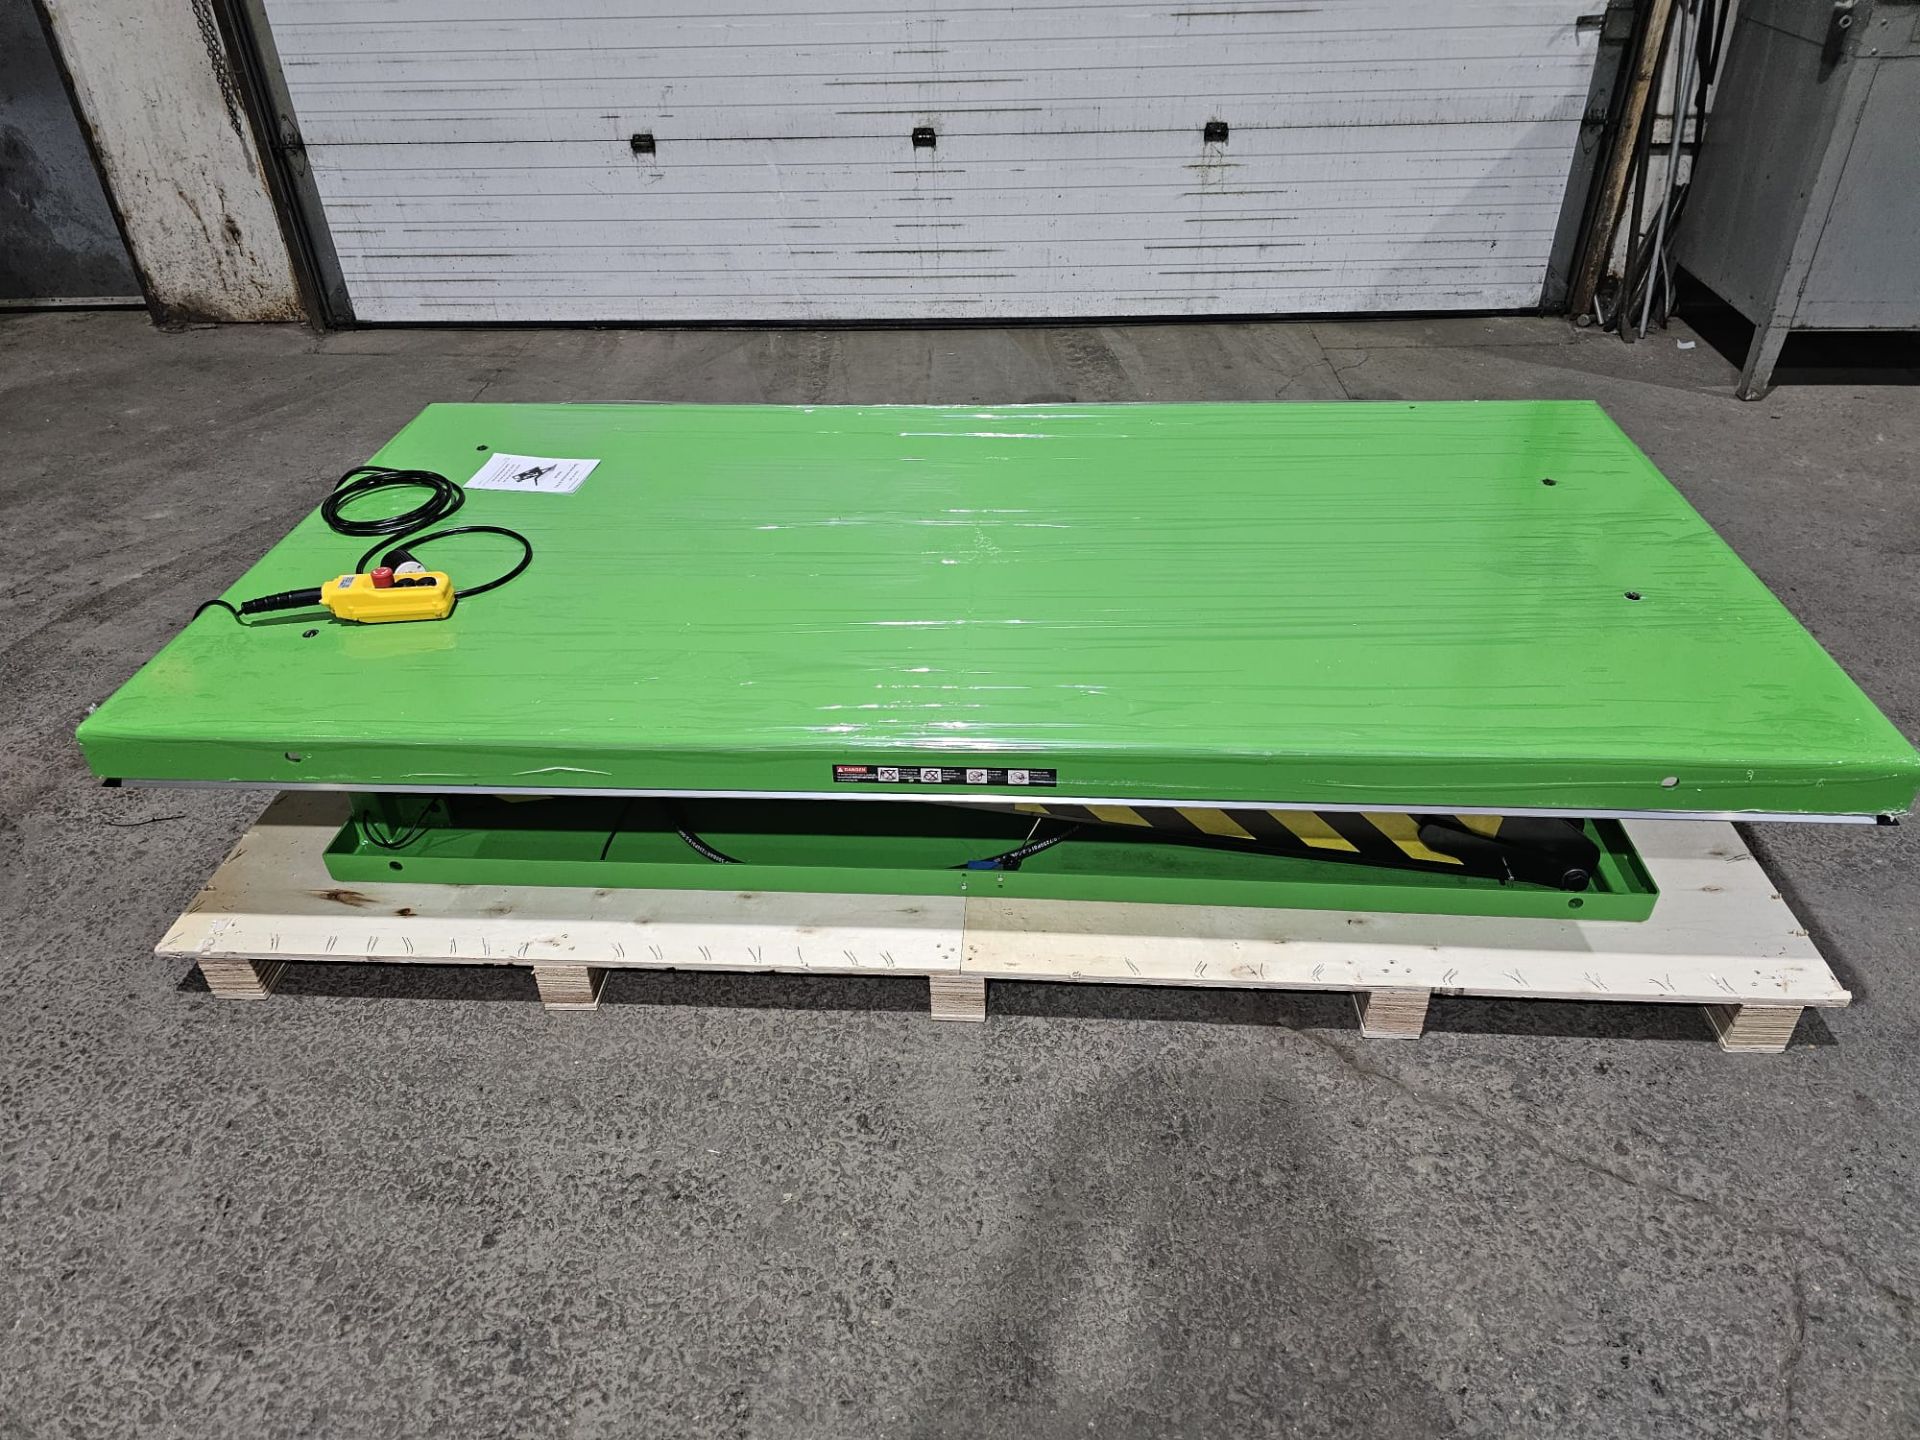 HW Hydraulic Lift Table 94" x 47" x 64" lift - 11,000lbs capacity - UNUSED and MINT - 220V - Image 3 of 7